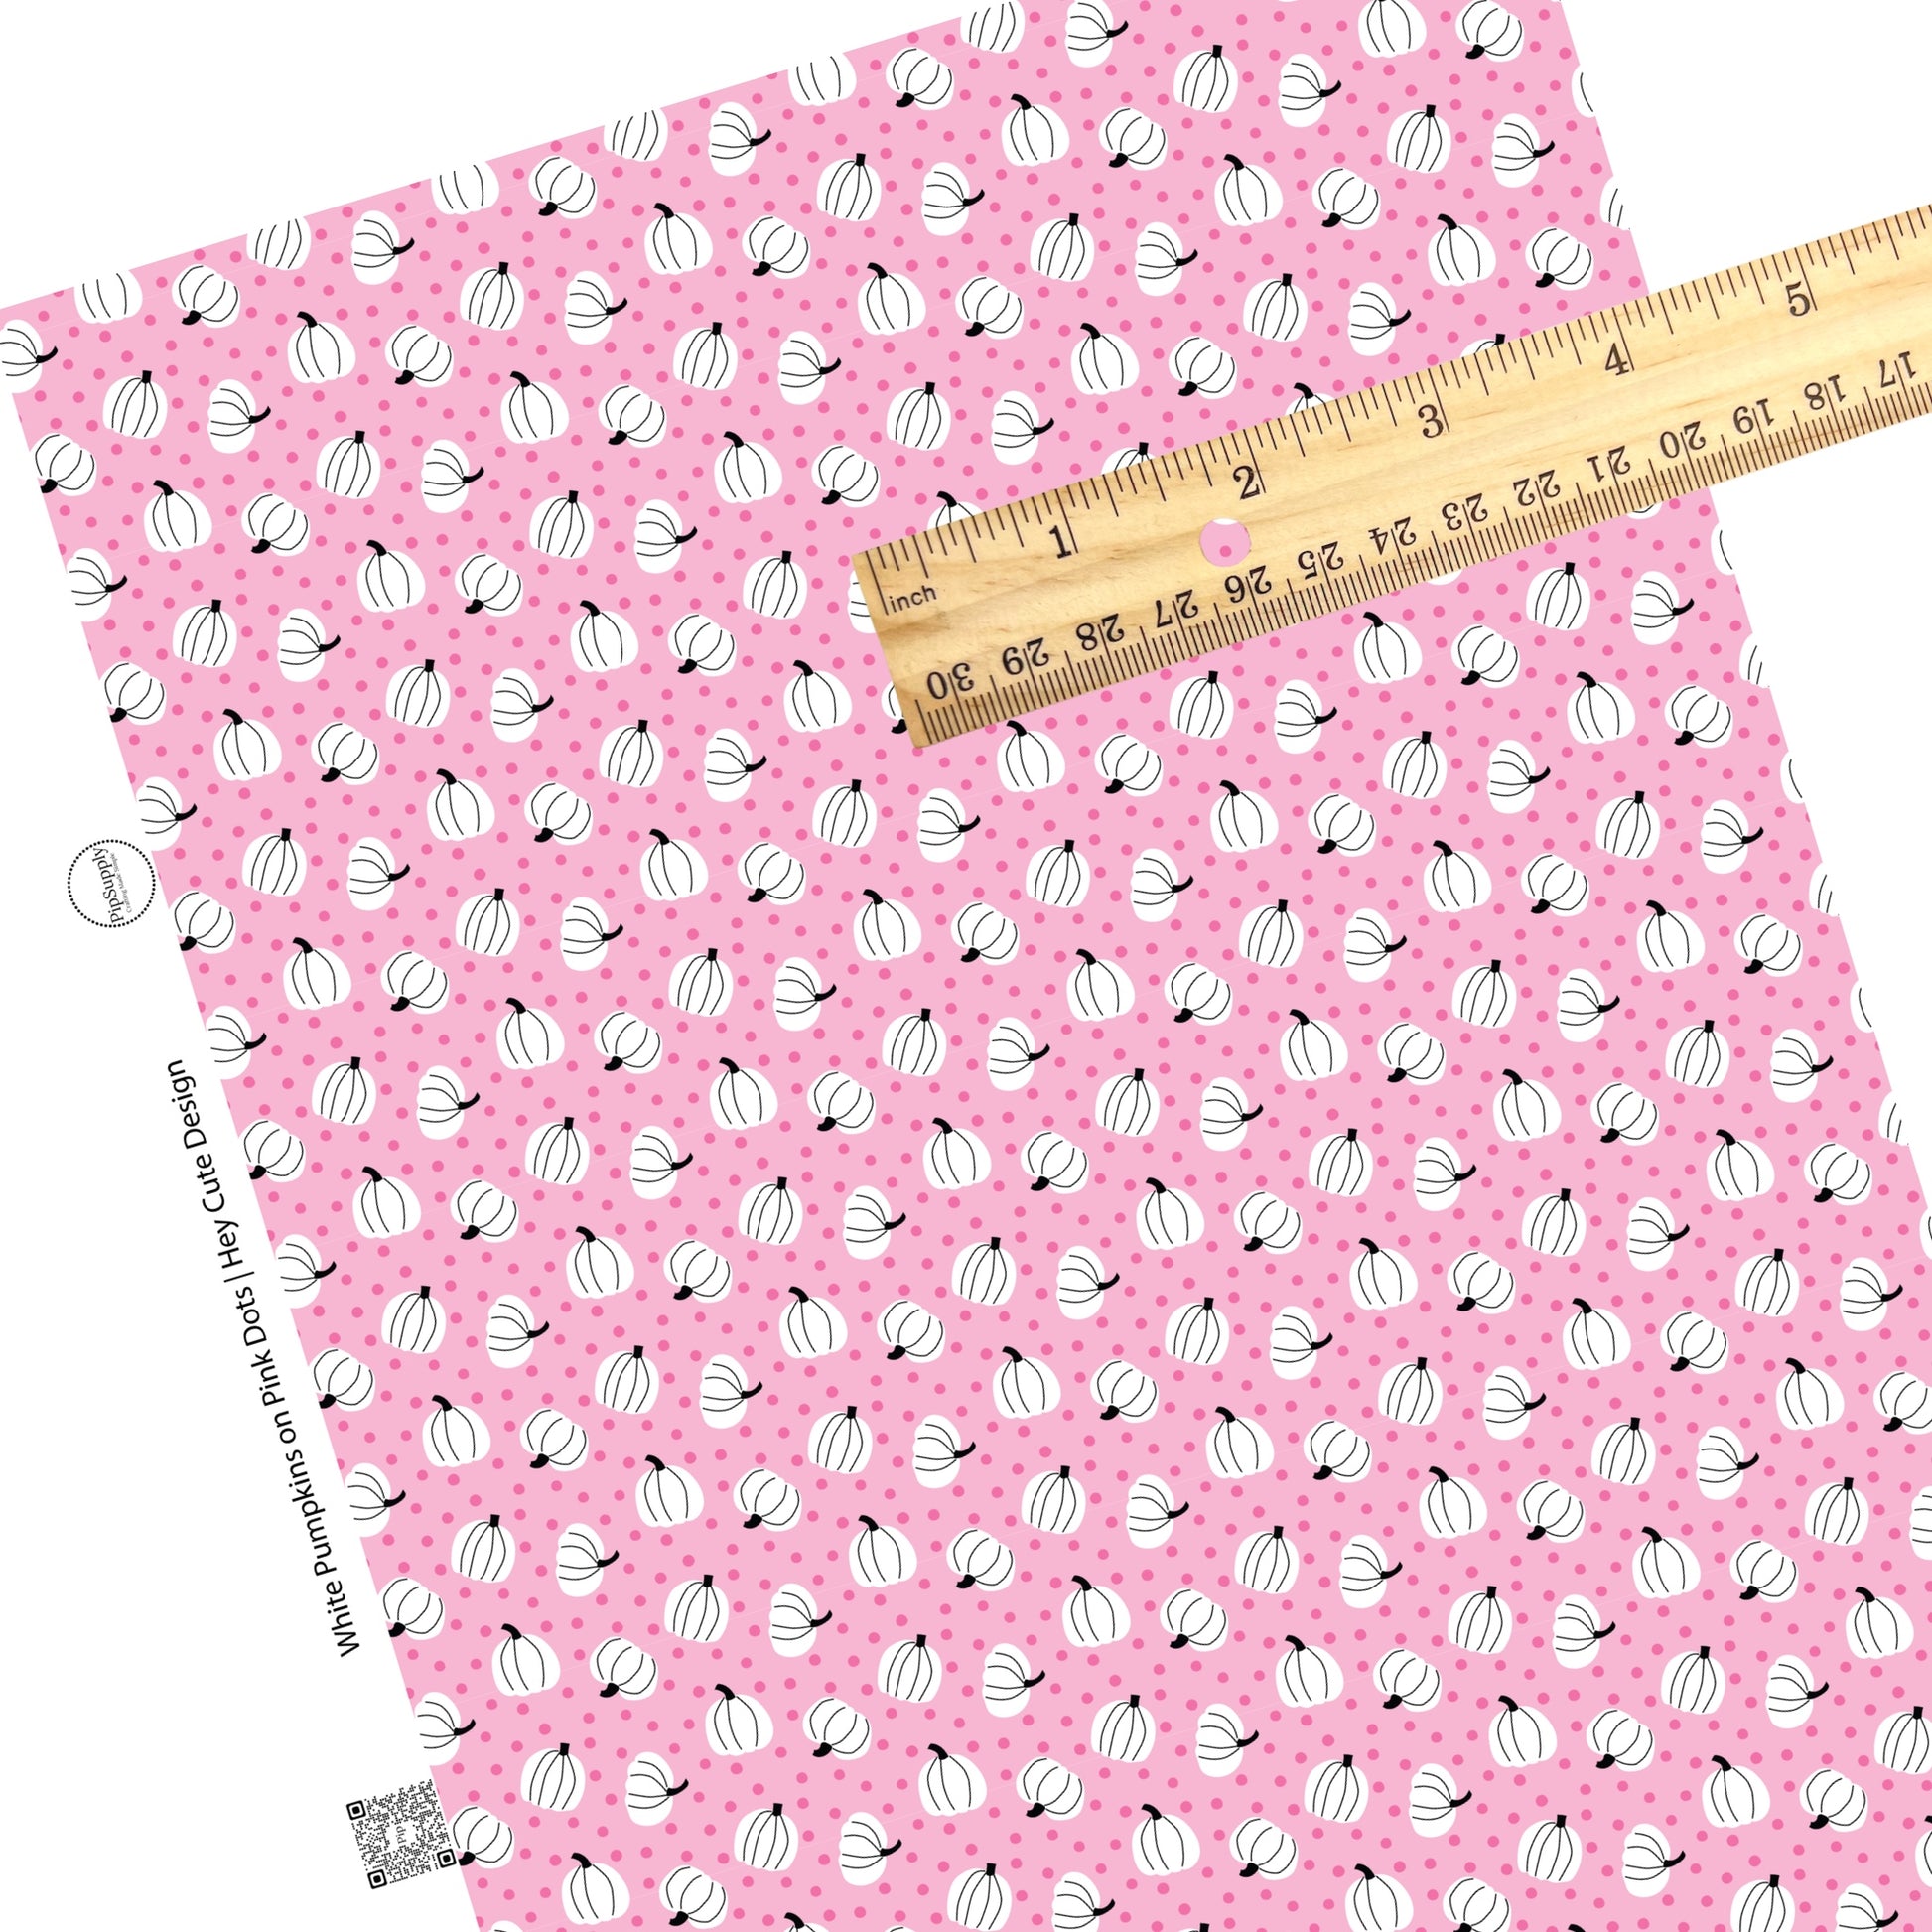 These Halloween themed pink faux leather sheets contain the following design elements: white pumpkins surrounded by tiny pink dots on light pink. Our CPSIA compliant faux leather sheets or rolls can be used for all types of crafting projects.